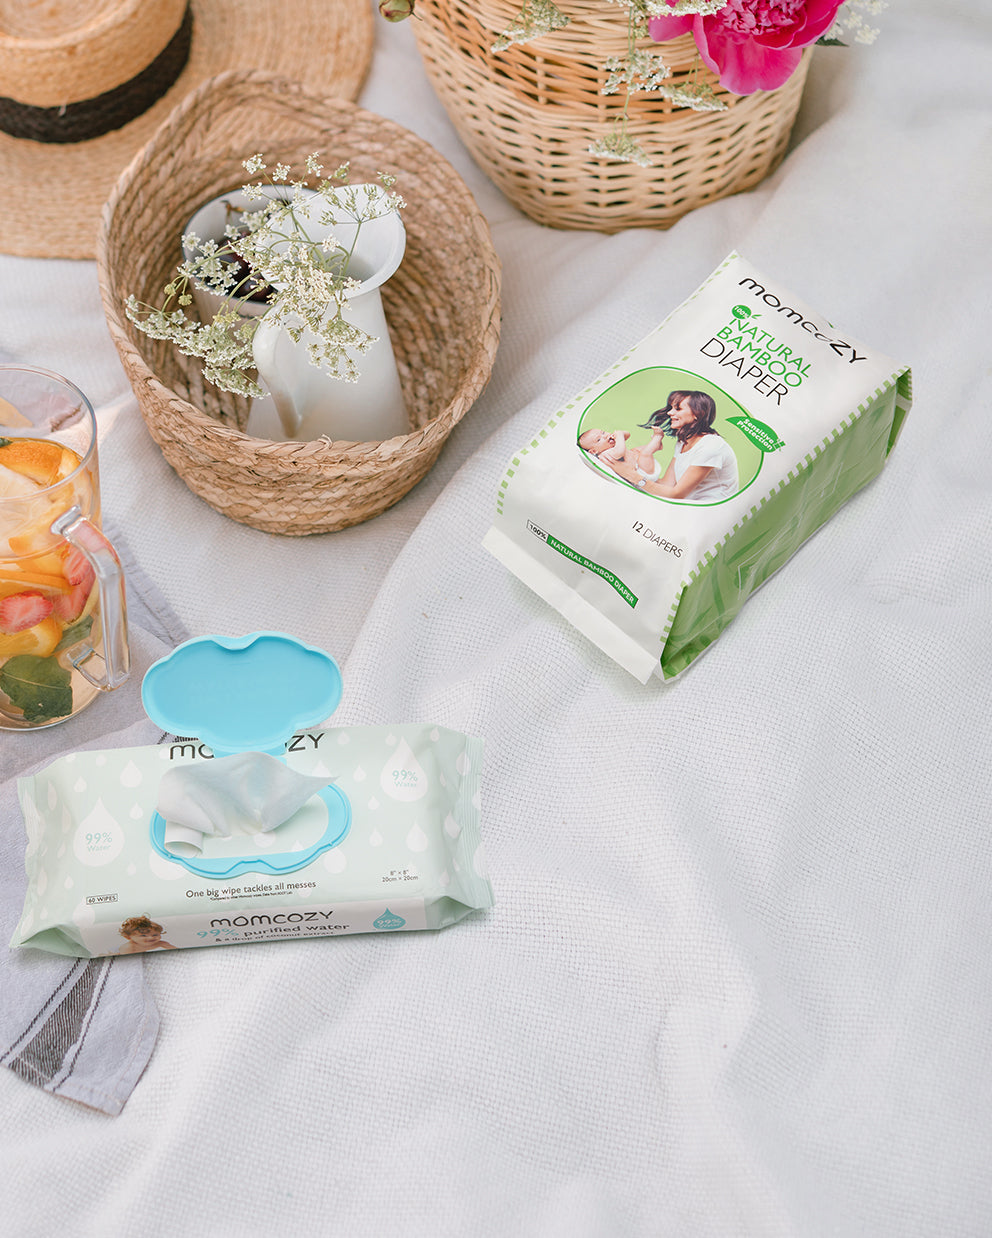 Bamboo Diaper - Travel Pack for Subscription